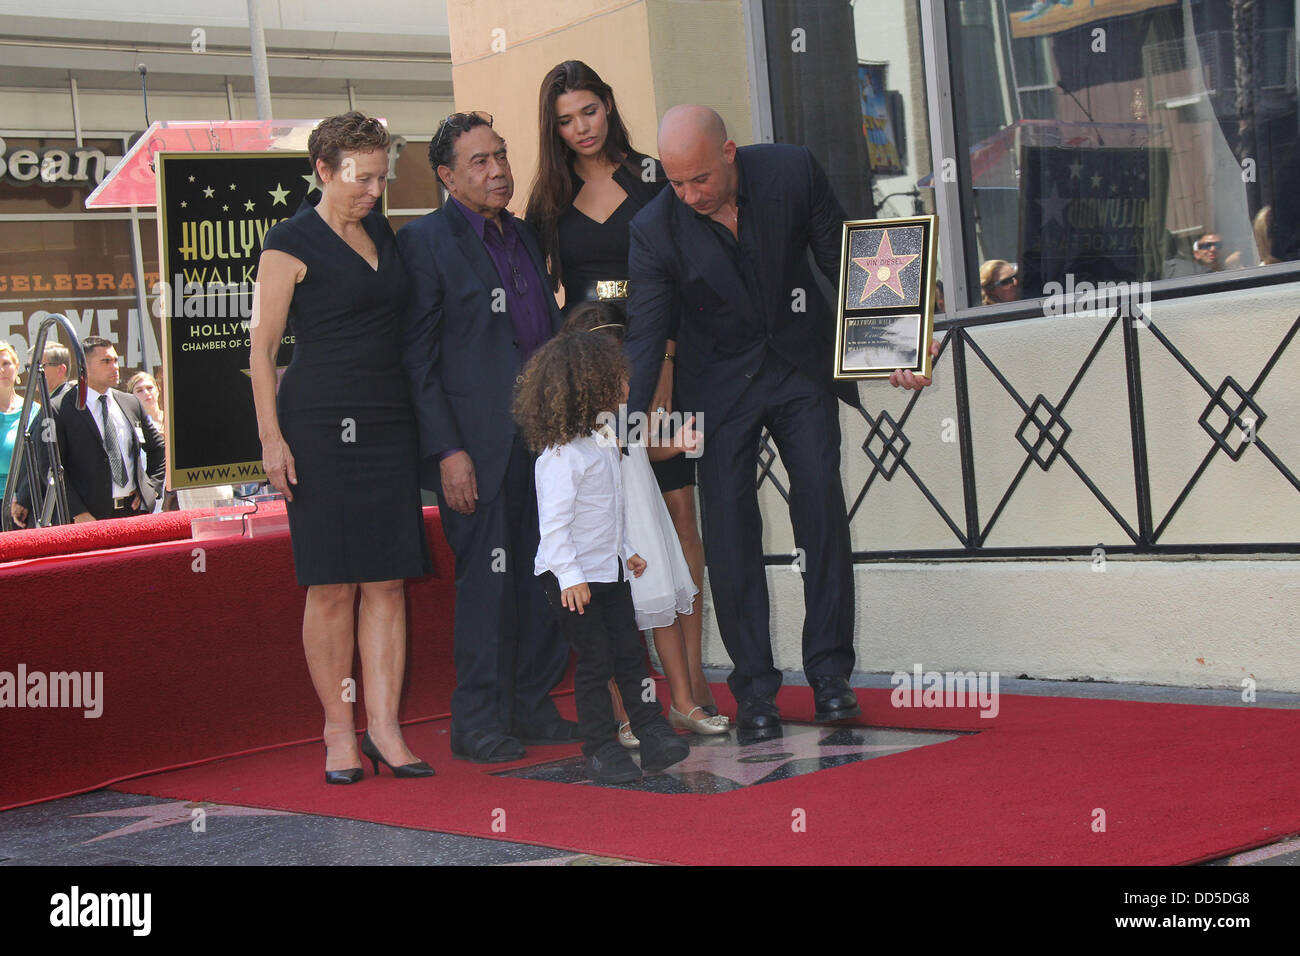 Hollywood, California, USA. 25th Aug, 2013. Vin Diesel Honored With Star On The Hollywood Walk Of Fame .Hollywood Blvd At Hollywood Roosevelt Hotel, Hollywood, CA.08/26/2013 .VIN DIESEL WITH PALOMA JIMINEZ AND CHILDREN - DELORA SHERLEEN VINCENT - MOTHER OF VIN DIESEL AND IRVING H. VINCENT - STEPFATHER OF VIN DIESEL . 2013 Credit:  Clinton Wallace/Globe Photos/ZUMAPRESS.com/Alamy Live News Stock Photo